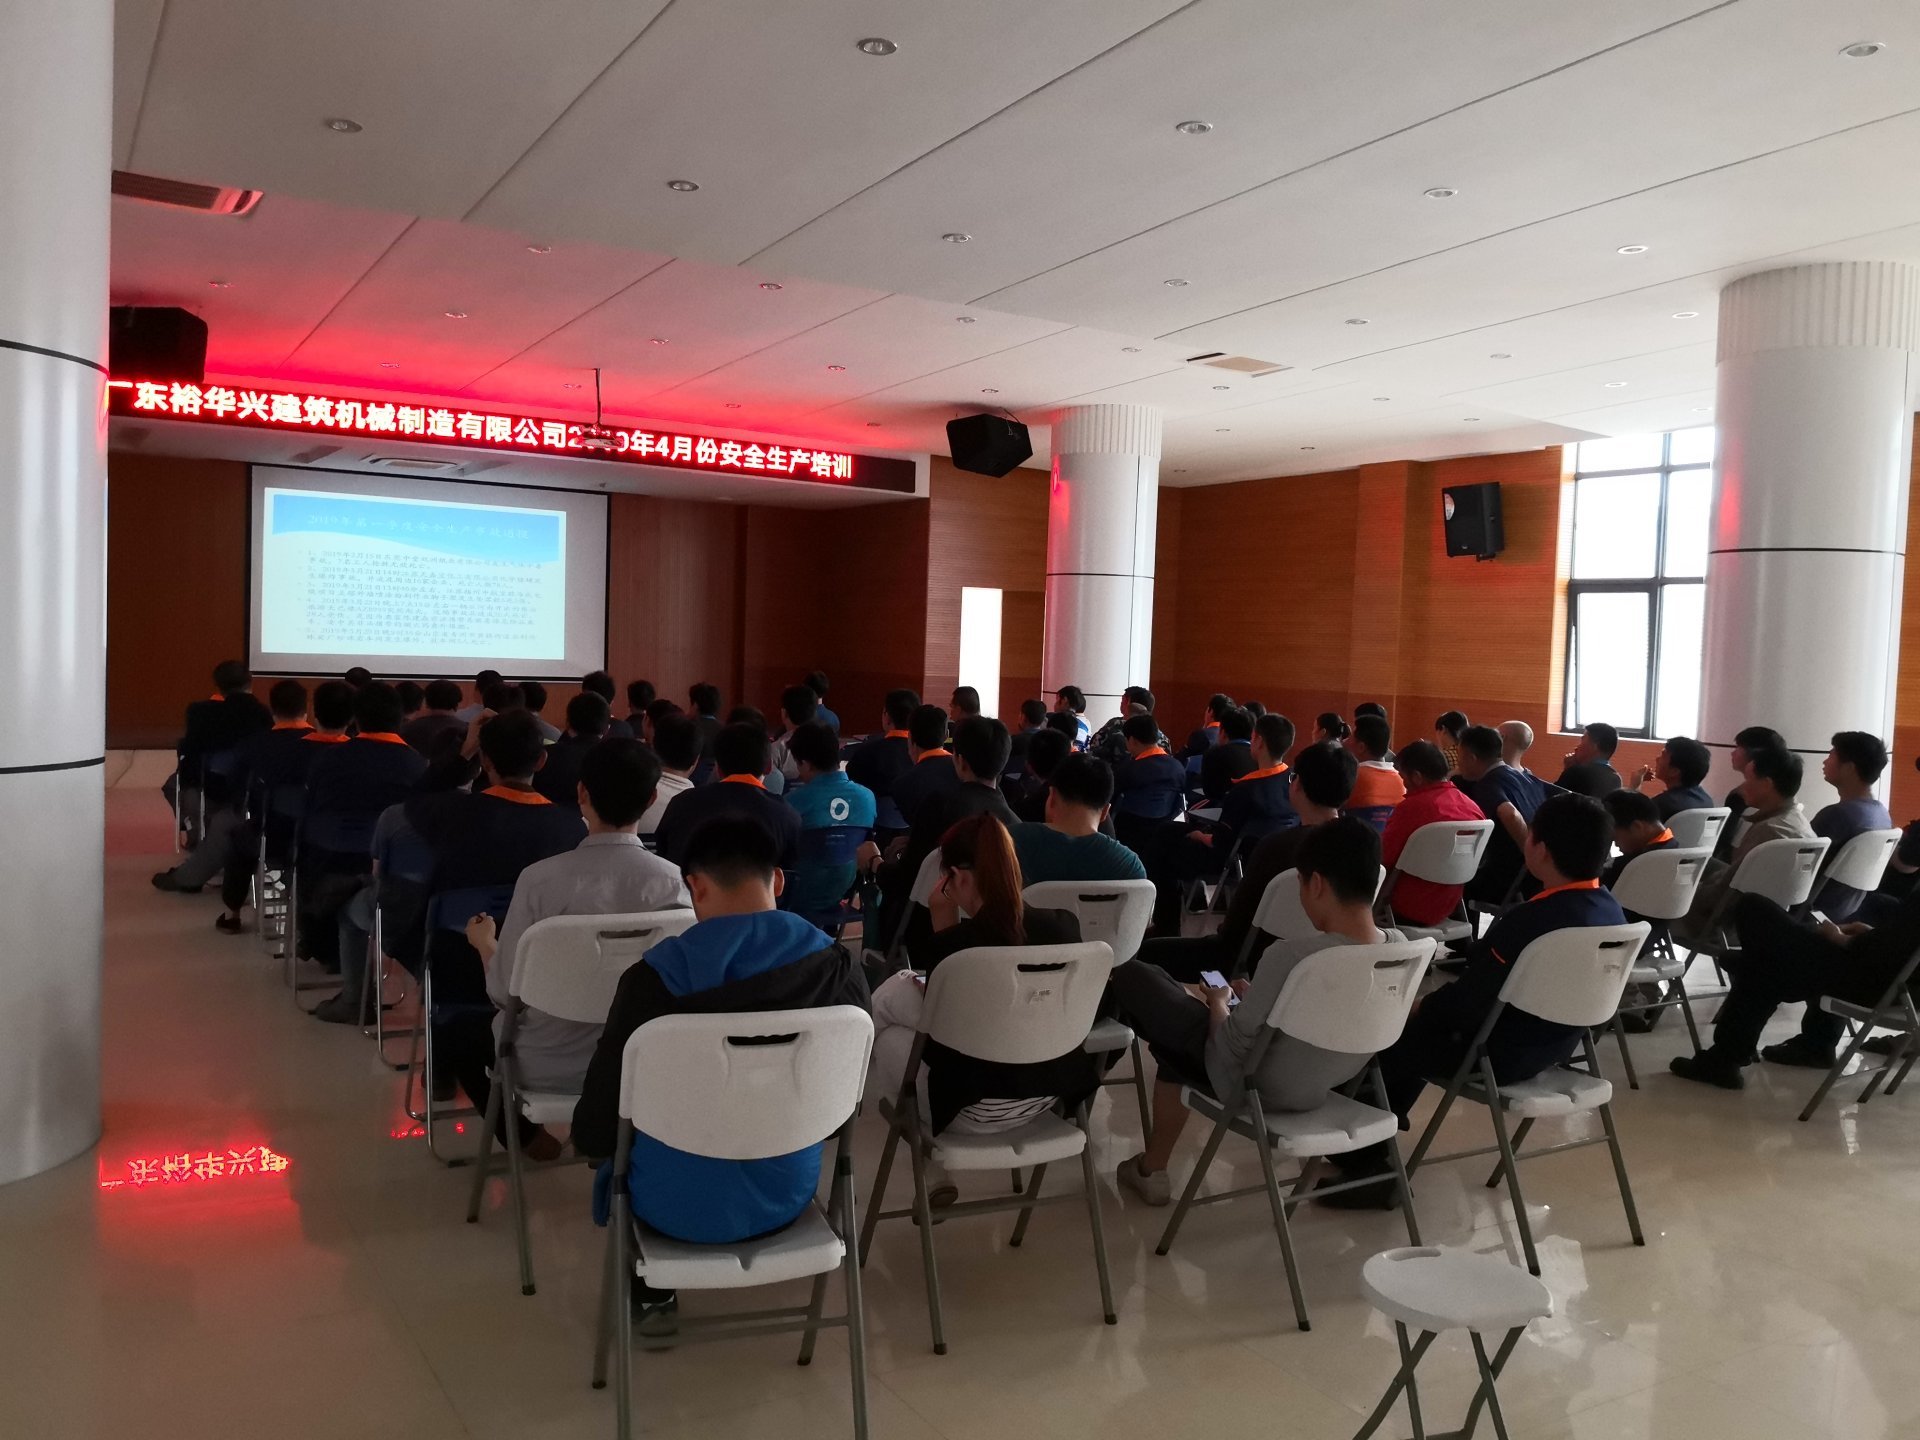 On April 20, 2019, YHX held safety production training activities